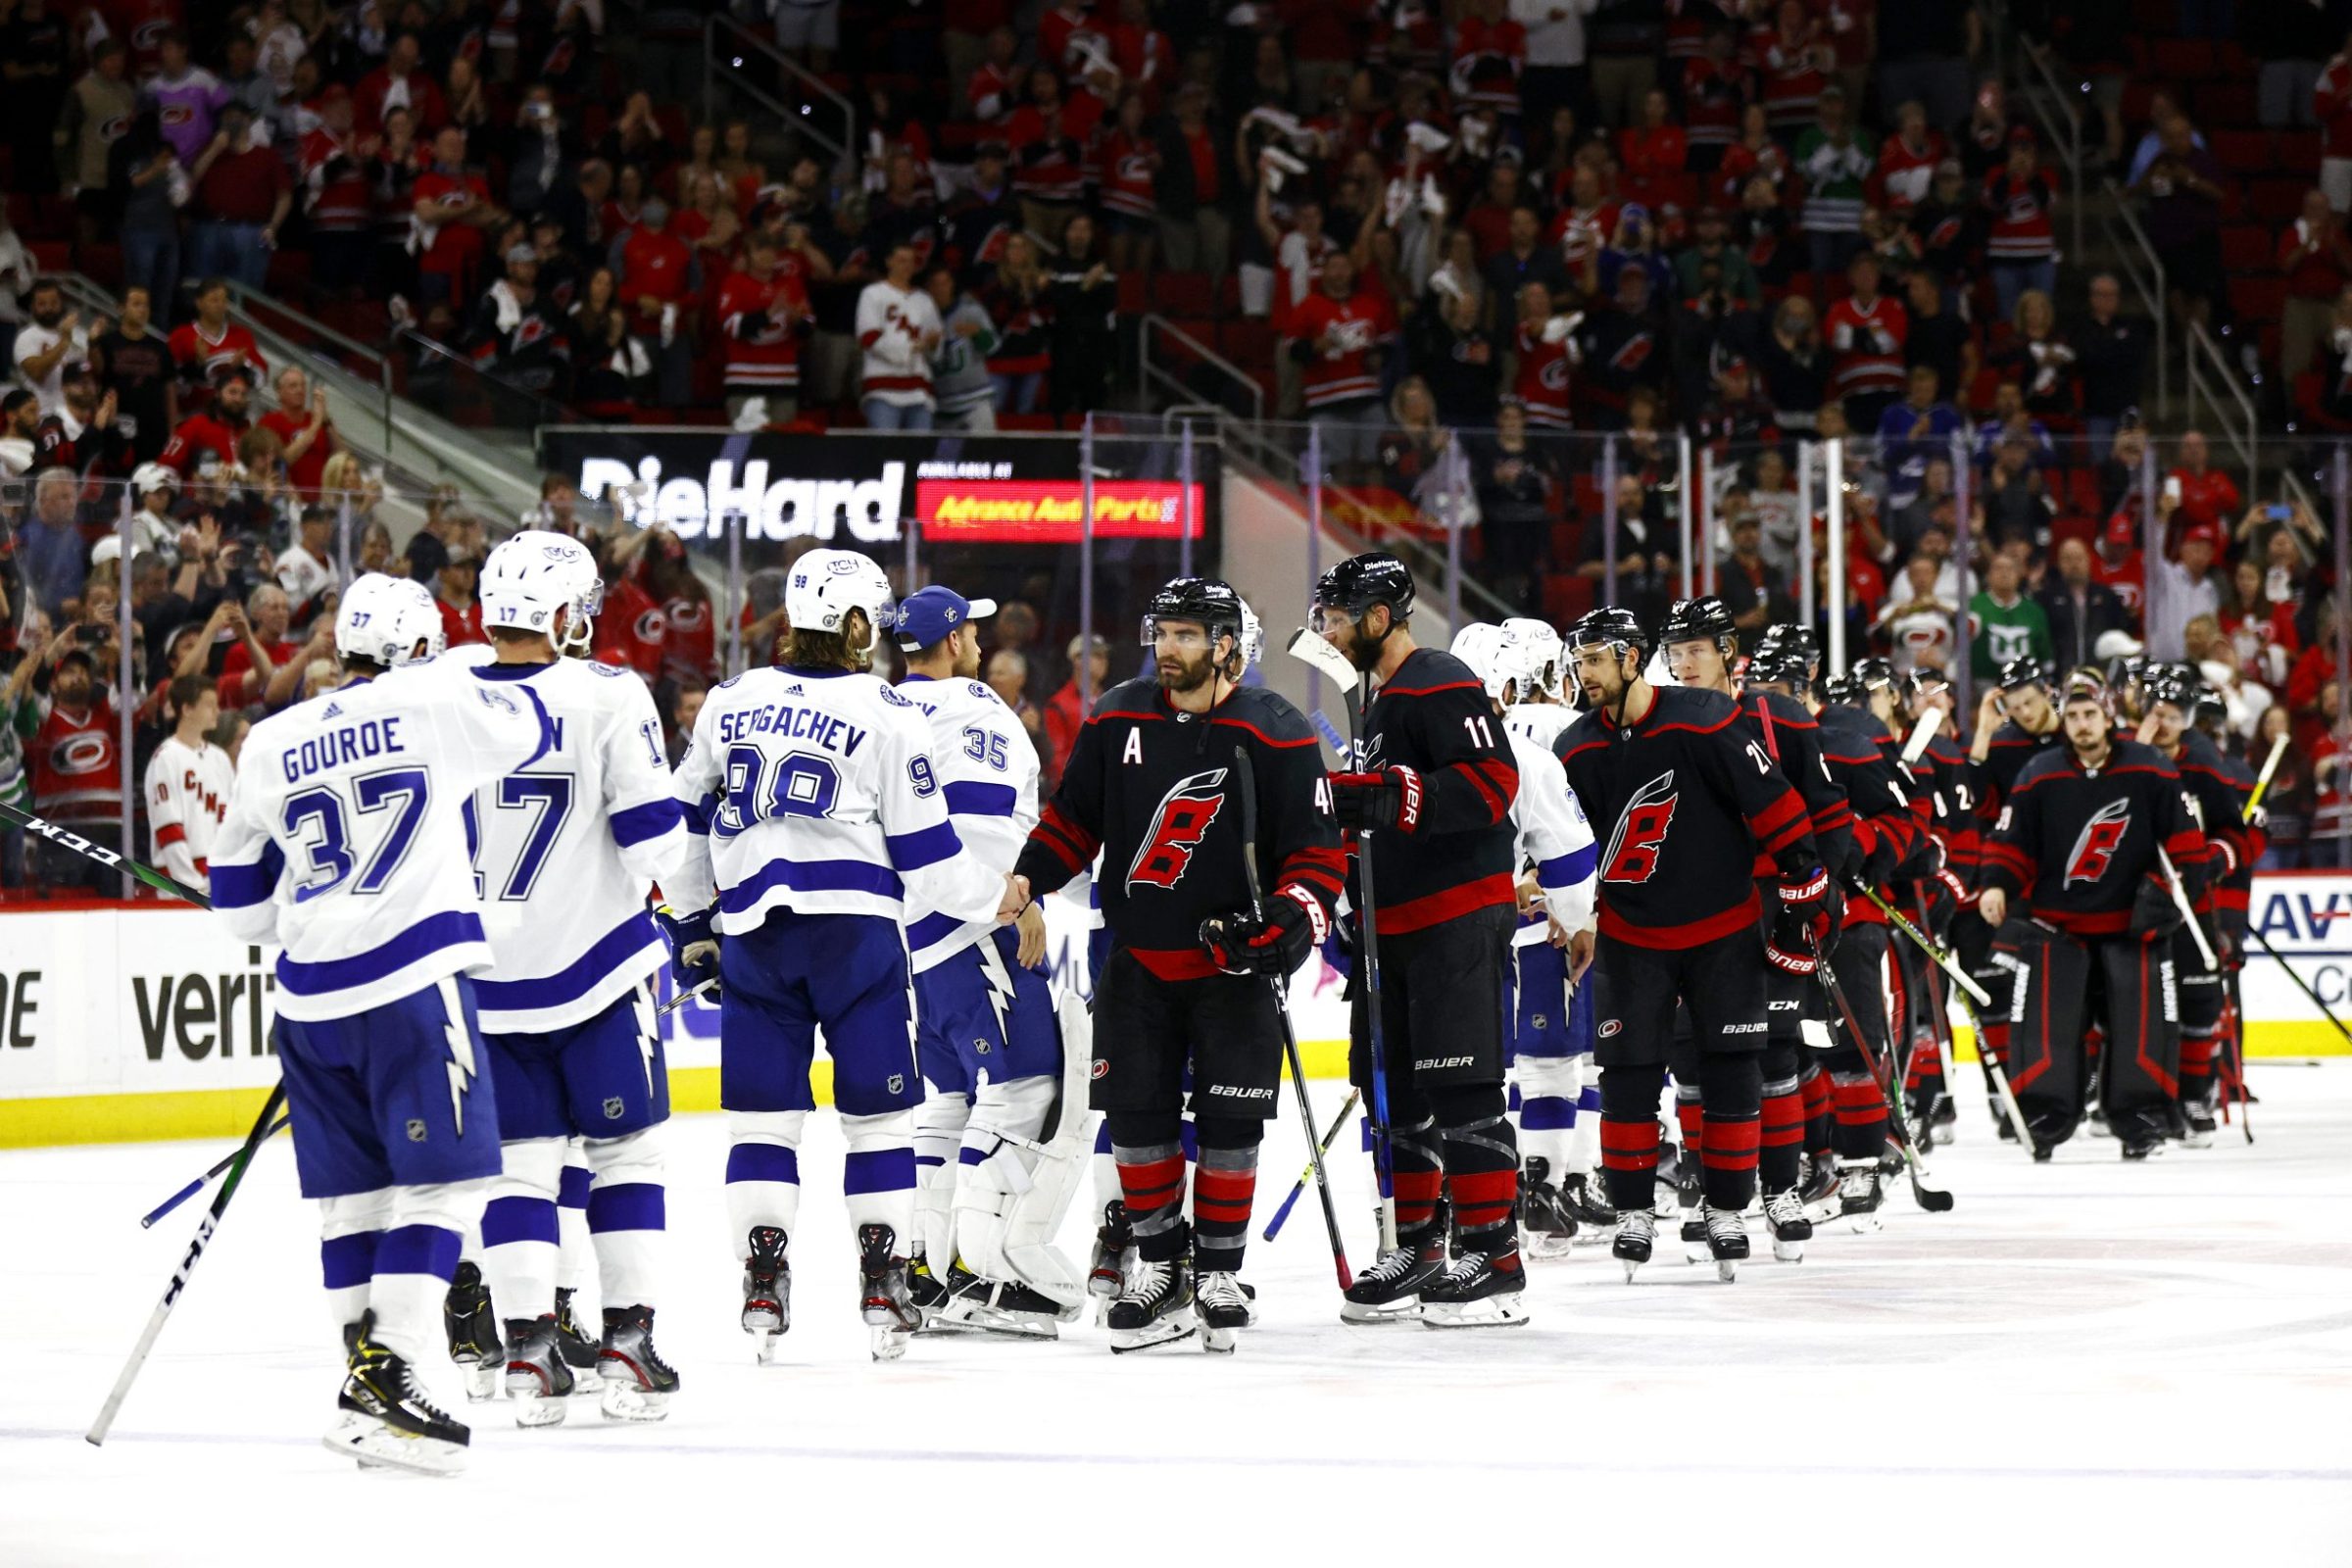 the Lightning shake hands with the Hurricanes